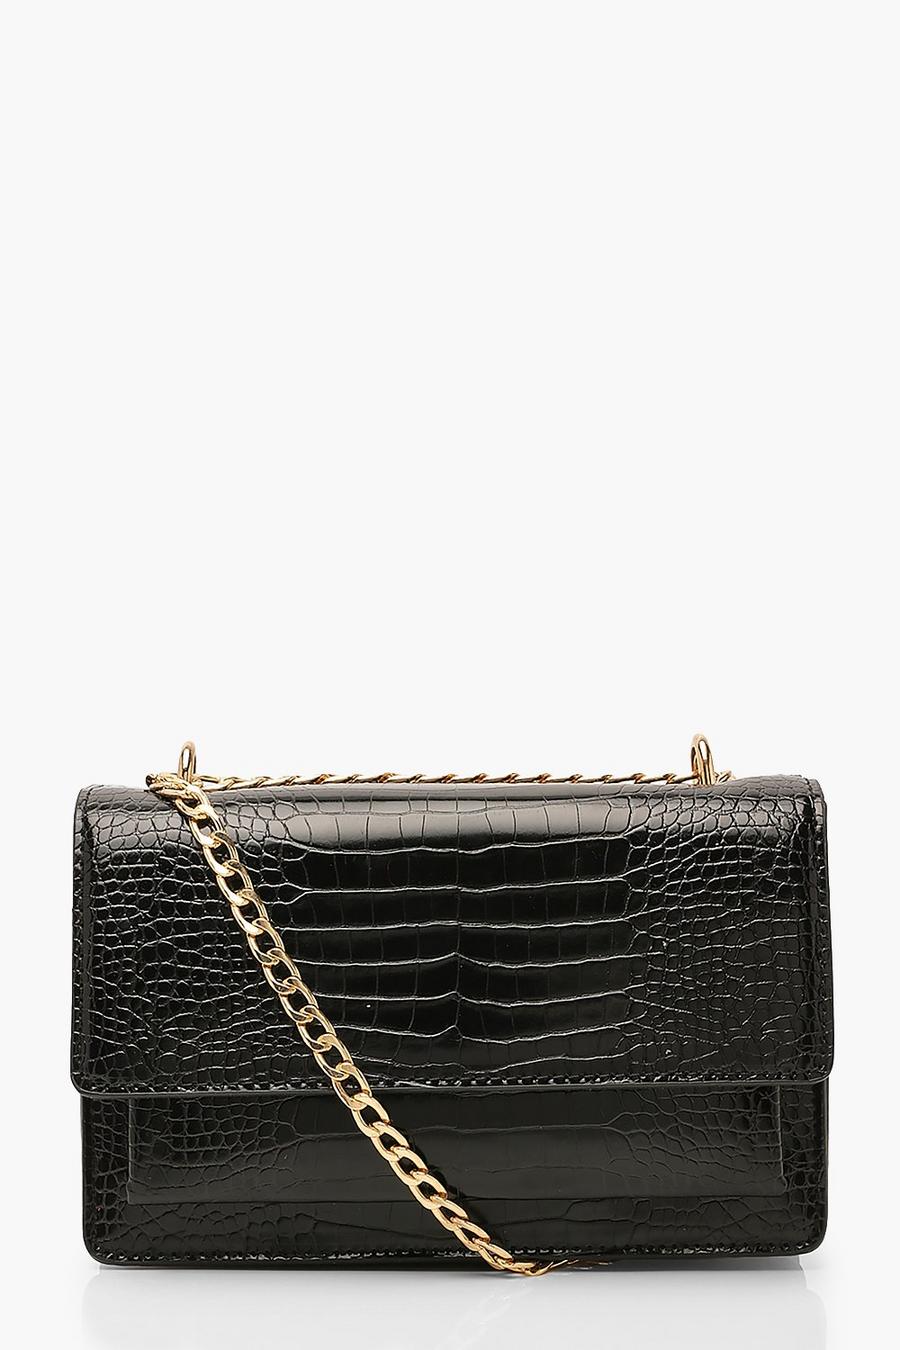 Black Croc Structured Crossbody & Chain Bag image number 1